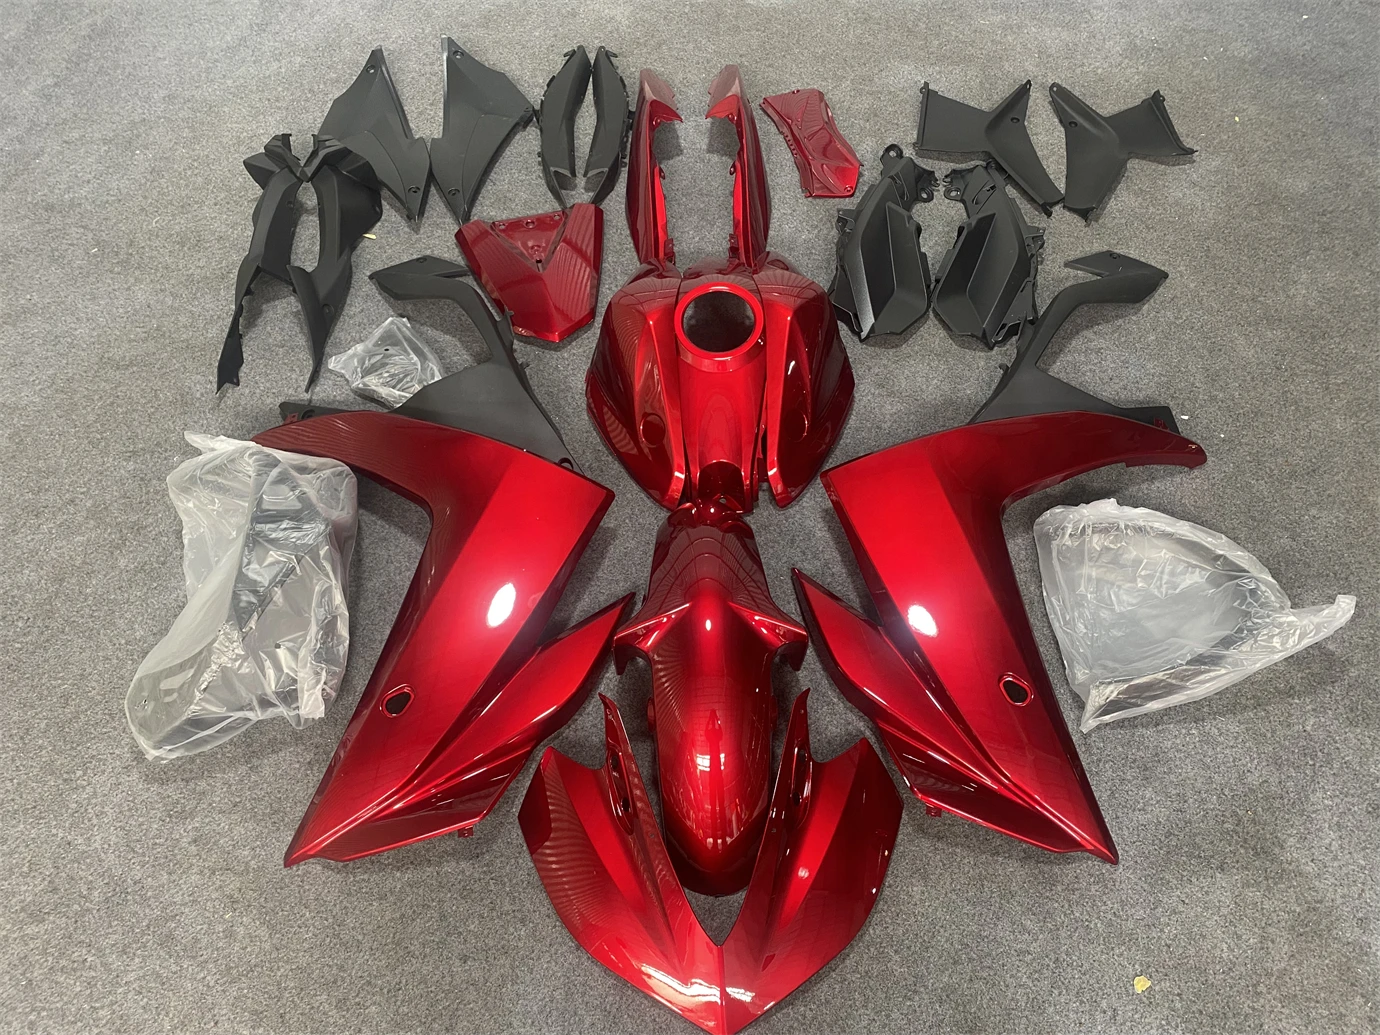 Motorcycle Full Body Fairing Suitable for Yamaha R3 15-18 Years R25 2015 2016 2017 2018 Fairing Wine red Black